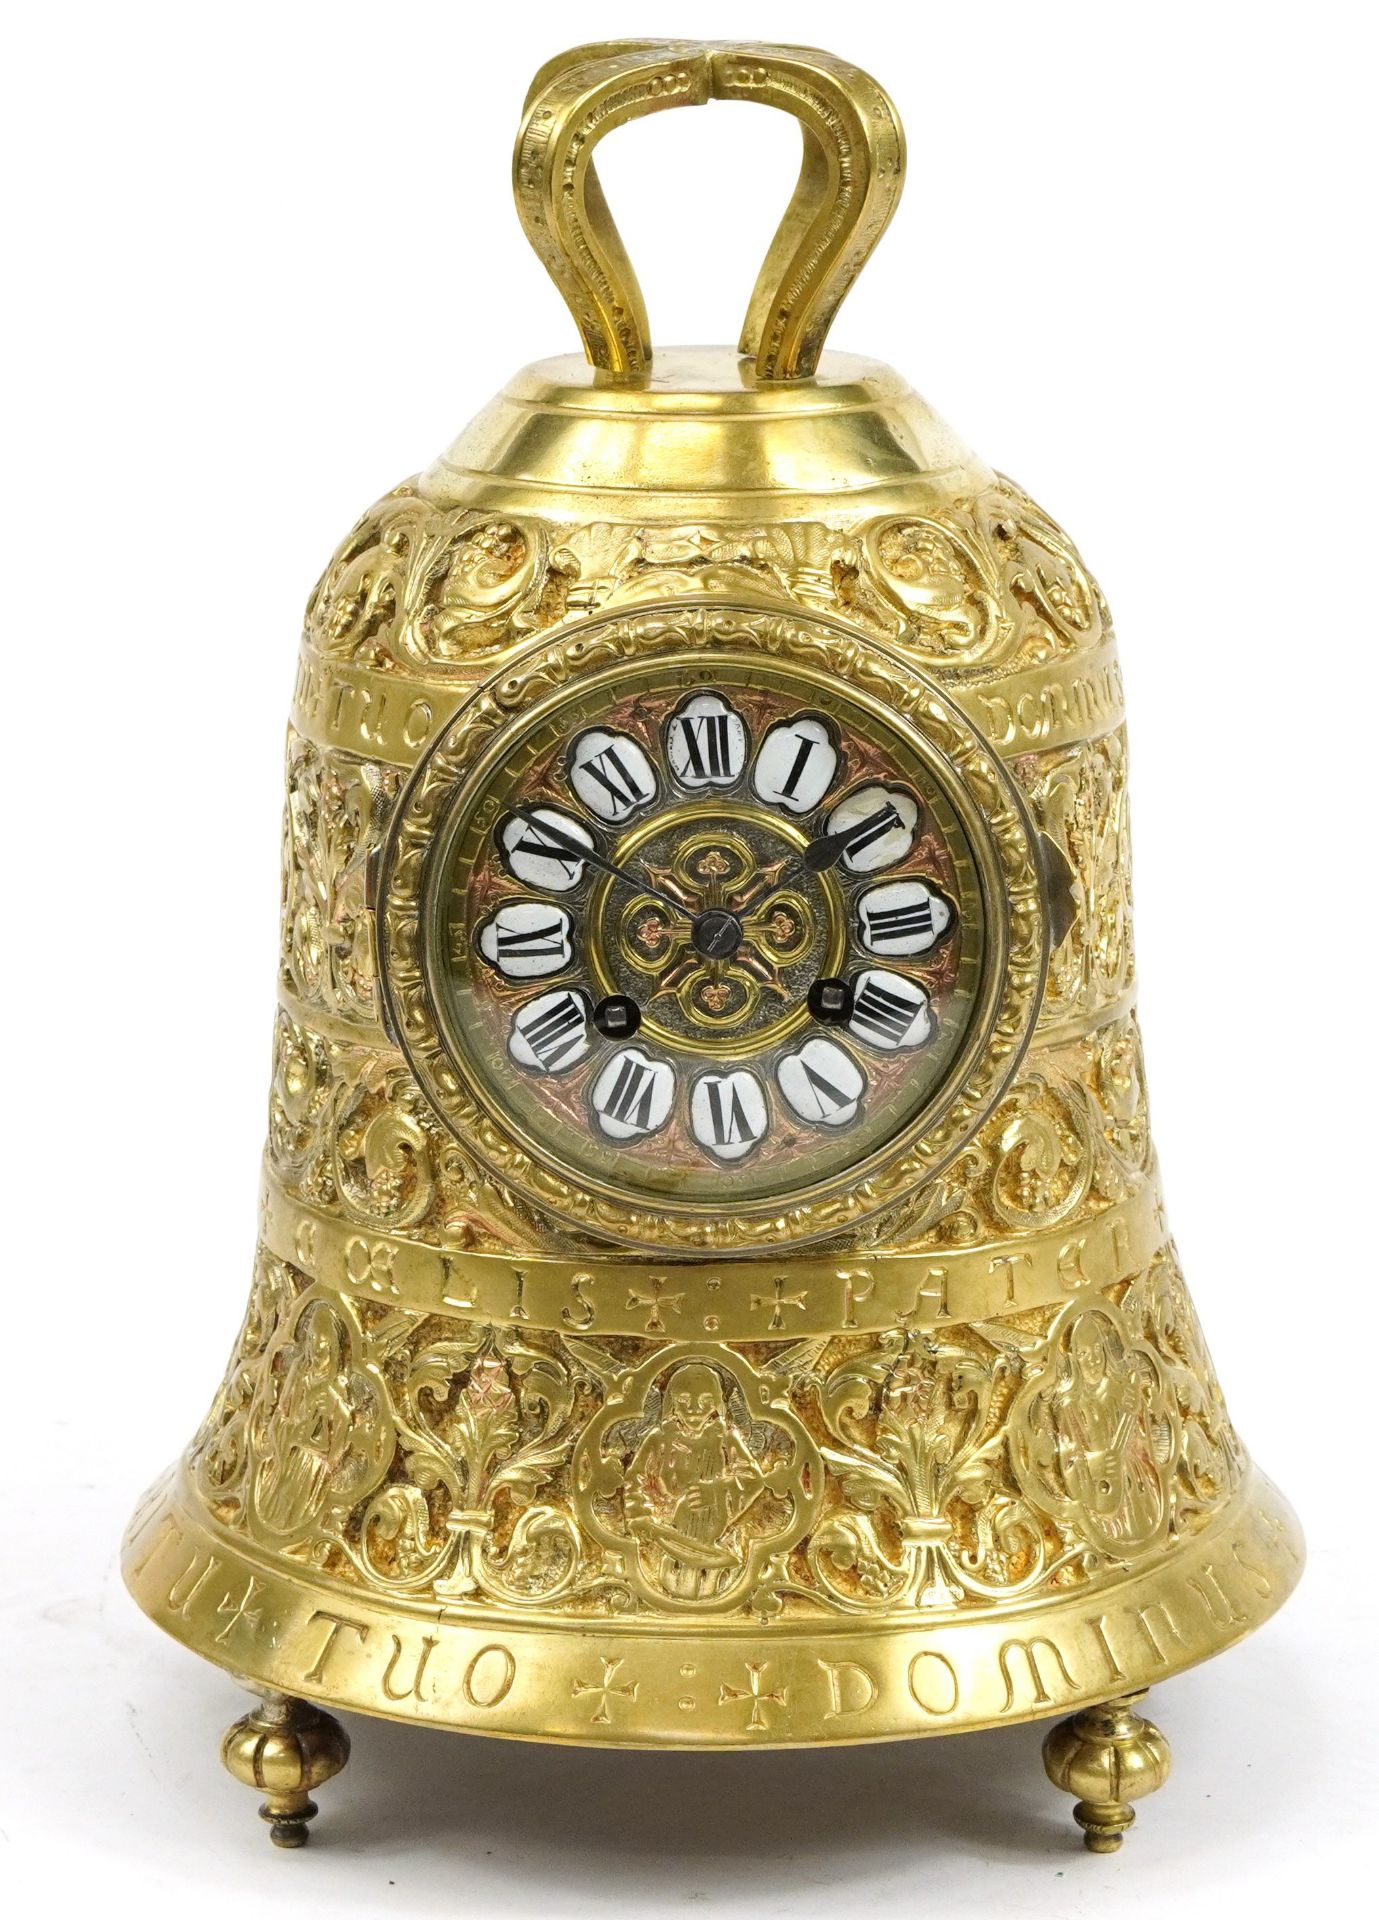 19th century ornate gilt metal bell shaped mantle clock having Roman numerals, the movement named